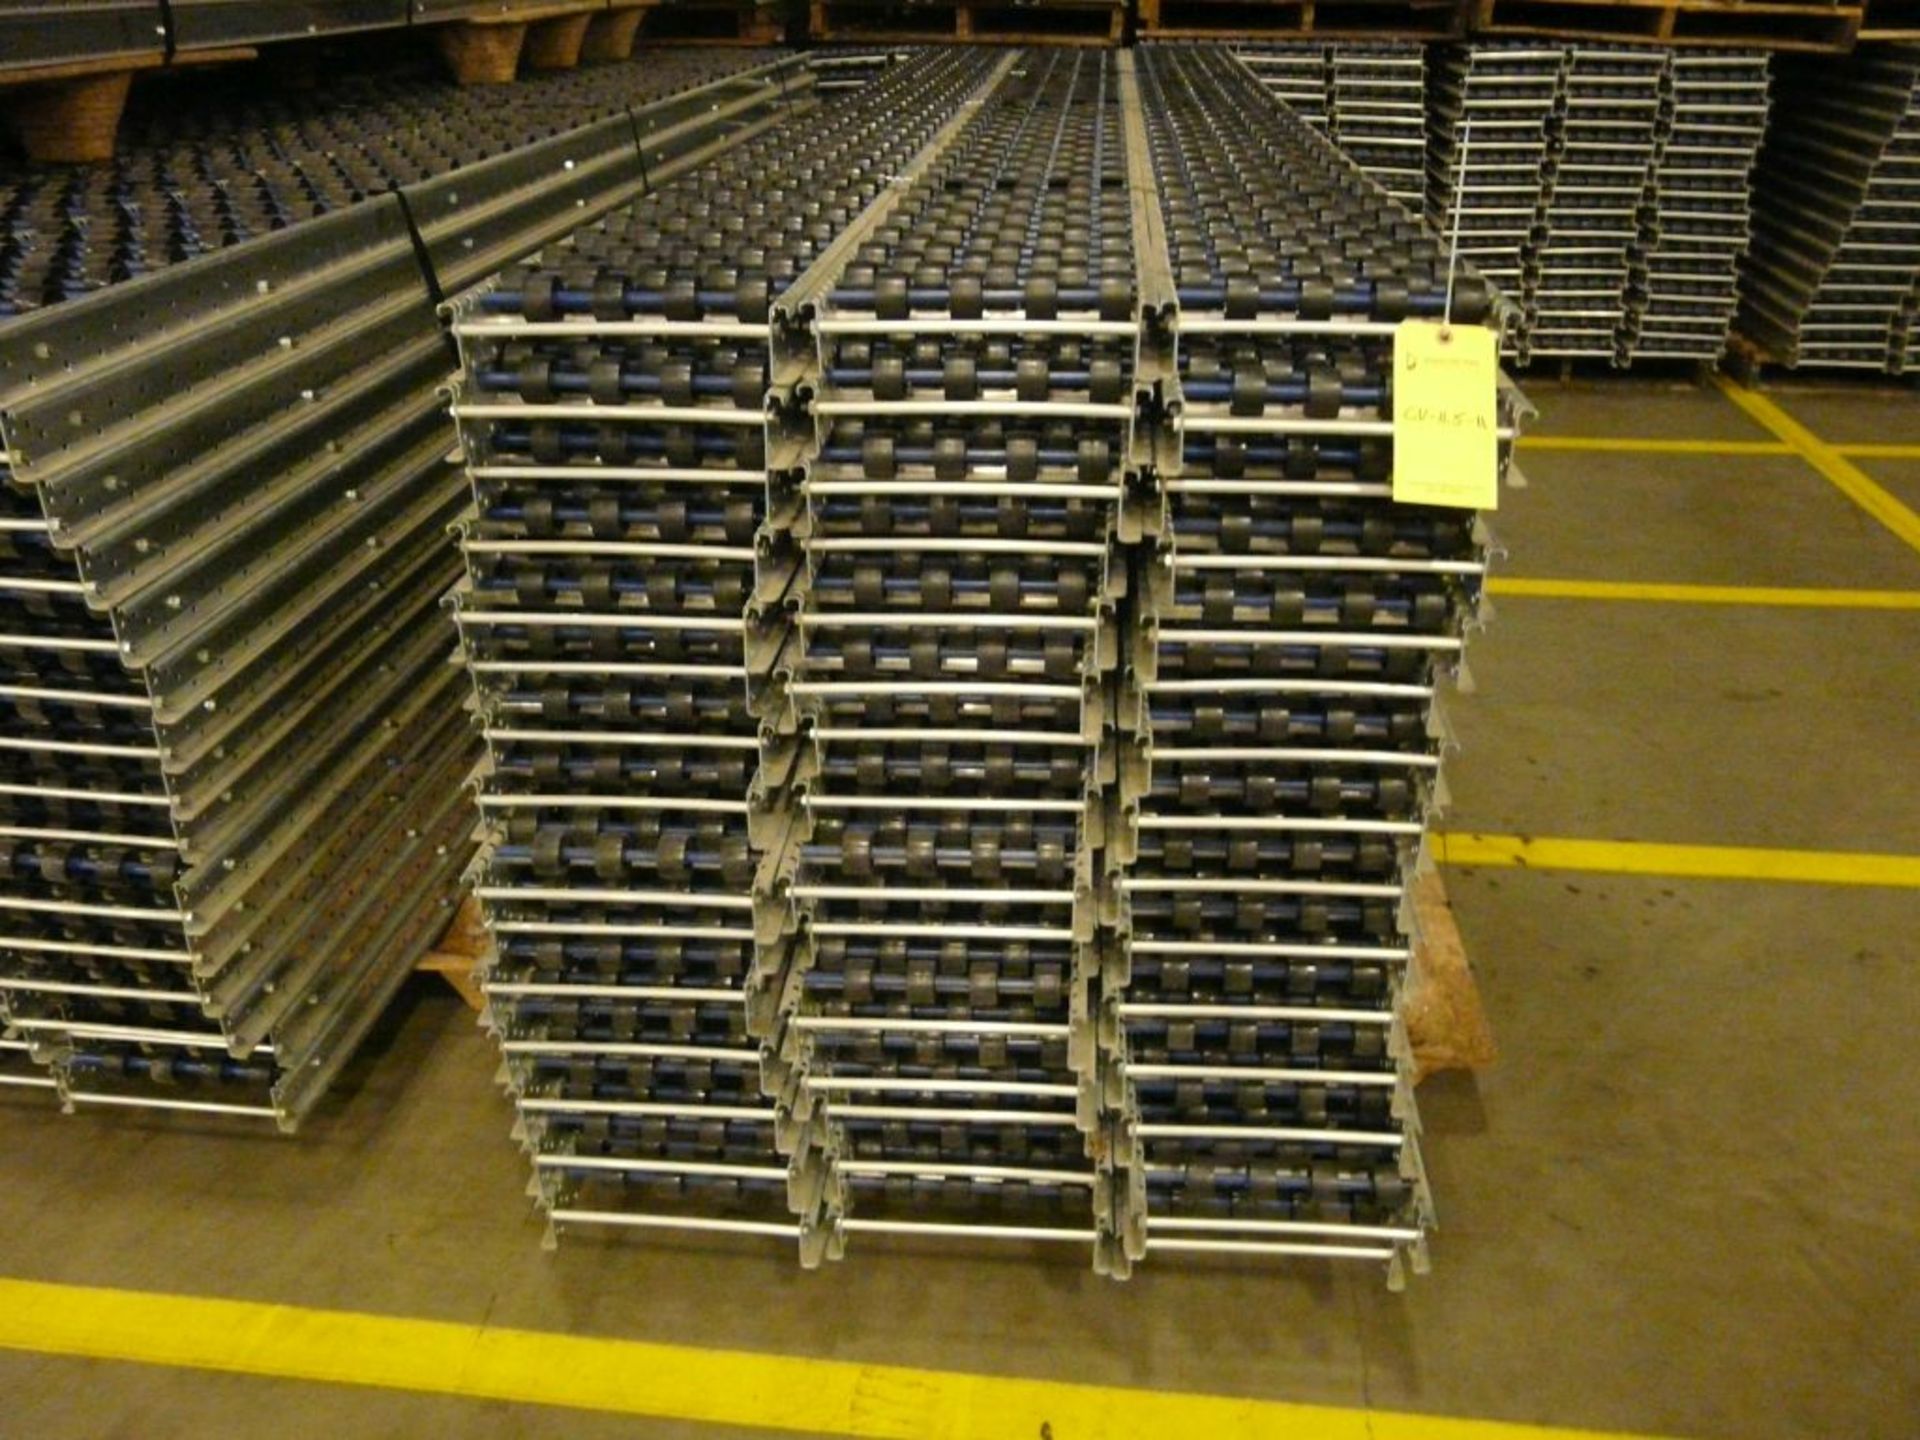 Lot of (90) SpanTrack Wheelbed Carton Flow Conveyors - 11.5'L x 11"W; Tag: 223632 - $30 Lot - Image 2 of 4